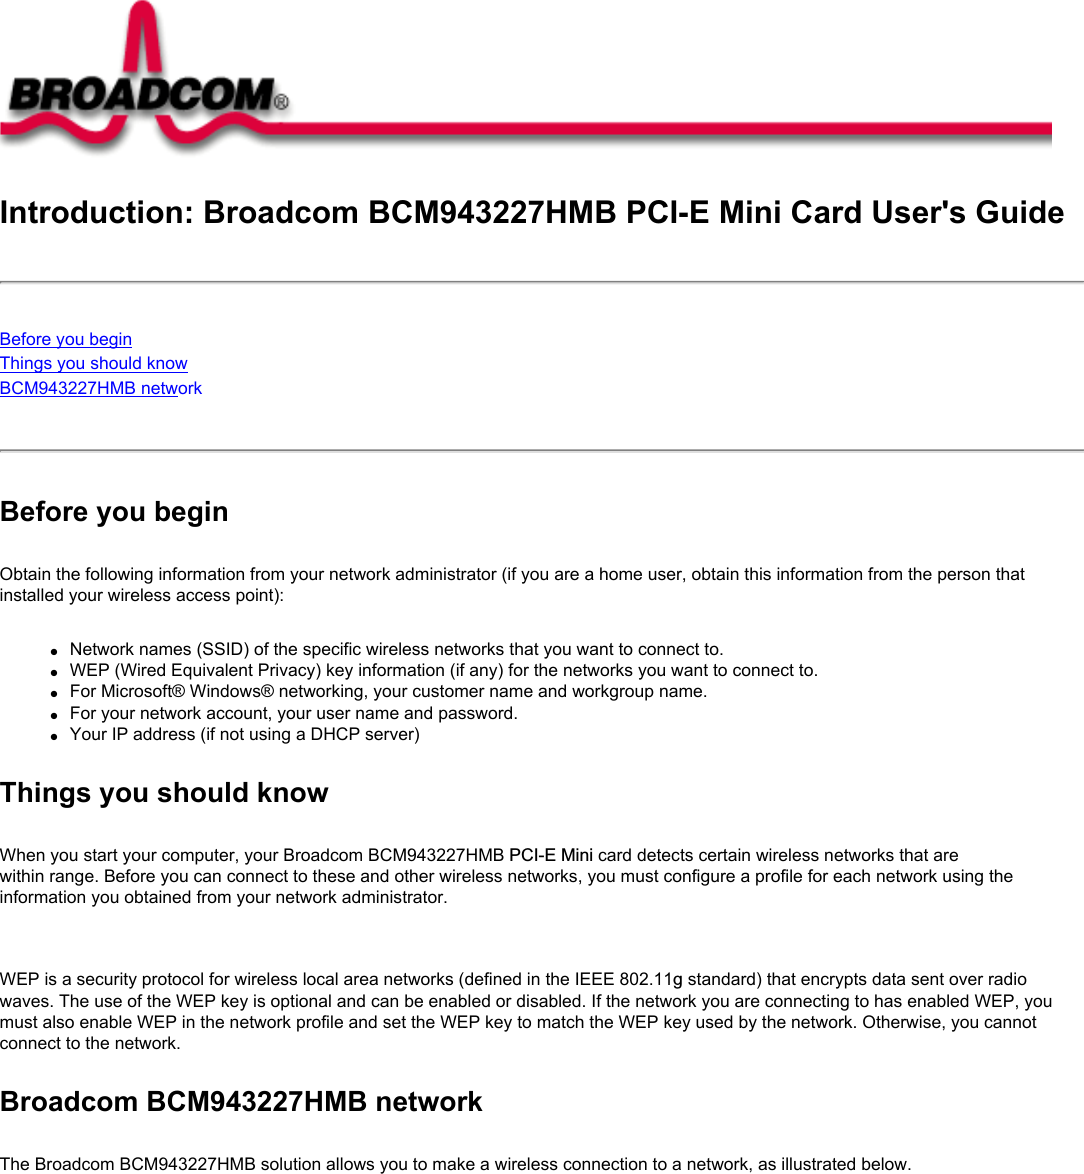 Introduction: Broadcom BCM943227HMB PCI-E Mini Card User&apos;s GuideBefore you beginThings you should knowBCM943227HMB network Before you beginObtain the following information from your network administrator (if you are a home user, obtain this information from the person that installed your wireless access point):●     Network names (SSID) of the specific wireless networks that you want to connect to.●     WEP (Wired Equivalent Privacy) key information (if any) for the networks you want to connect to.●     For Microsoft® Windows® networking, your customer name and workgroup name.●     For your network account, your user name and password.●     Your IP address (if not using a DHCP server)Things you should knowWhen you start your computer, your Broadcom BCM943227HMB PCI-E Mini card detects certain wireless networks that are within range. Before you can connect to these and other wireless networks, you must configure a profile for each network using the information you obtained from your network administrator.   WEP is a security protocol for wireless local area networks (defined in the IEEE 802.11g standard) that encrypts data sent over radio waves. The use of the WEP key is optional and can be enabled or disabled. If the network you are connecting to has enabled WEP, you must also enable WEP in the network profile and set the WEP key to match the WEP key used by the network. Otherwise, you cannot connect to the network.Broadcom BCM943227HMB networkThe Broadcom BCM943227HMB solution allows you to make a wireless connection to a network, as illustrated below.